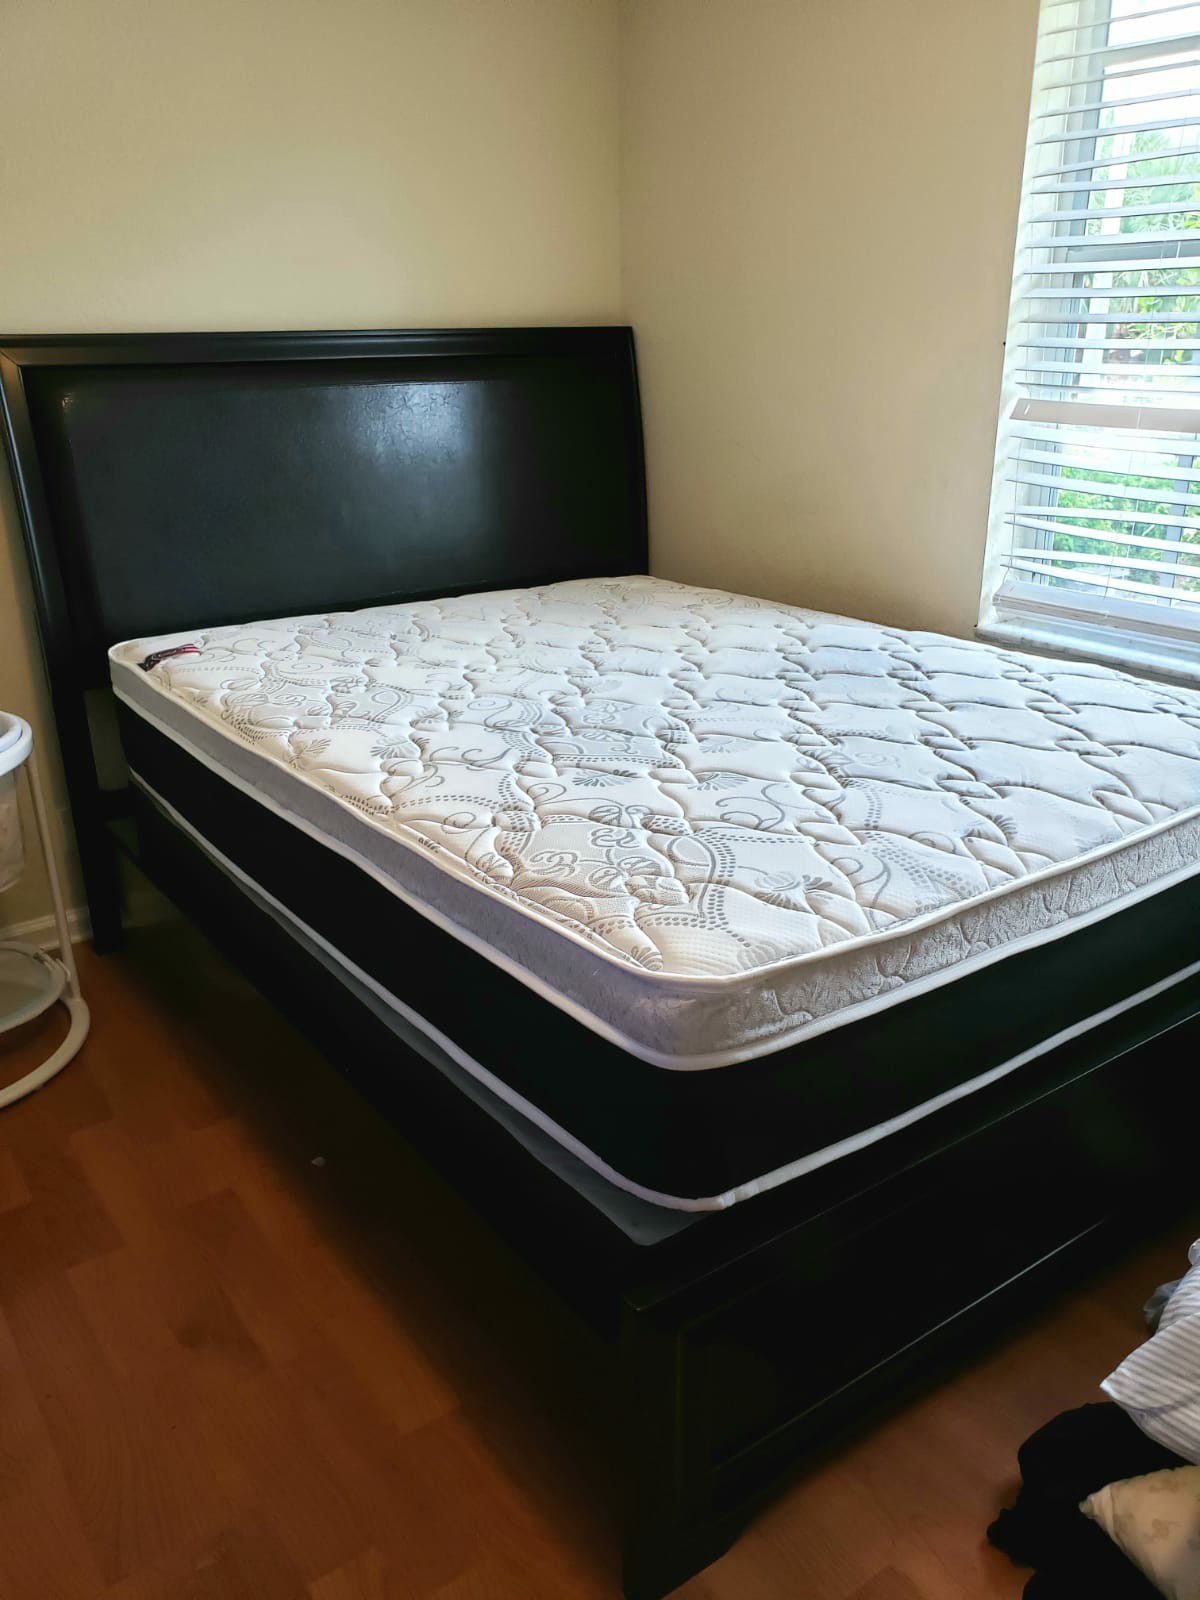 NEW Pillowtop QUEEN mattress & BOX spring. Bed frame not included on offer